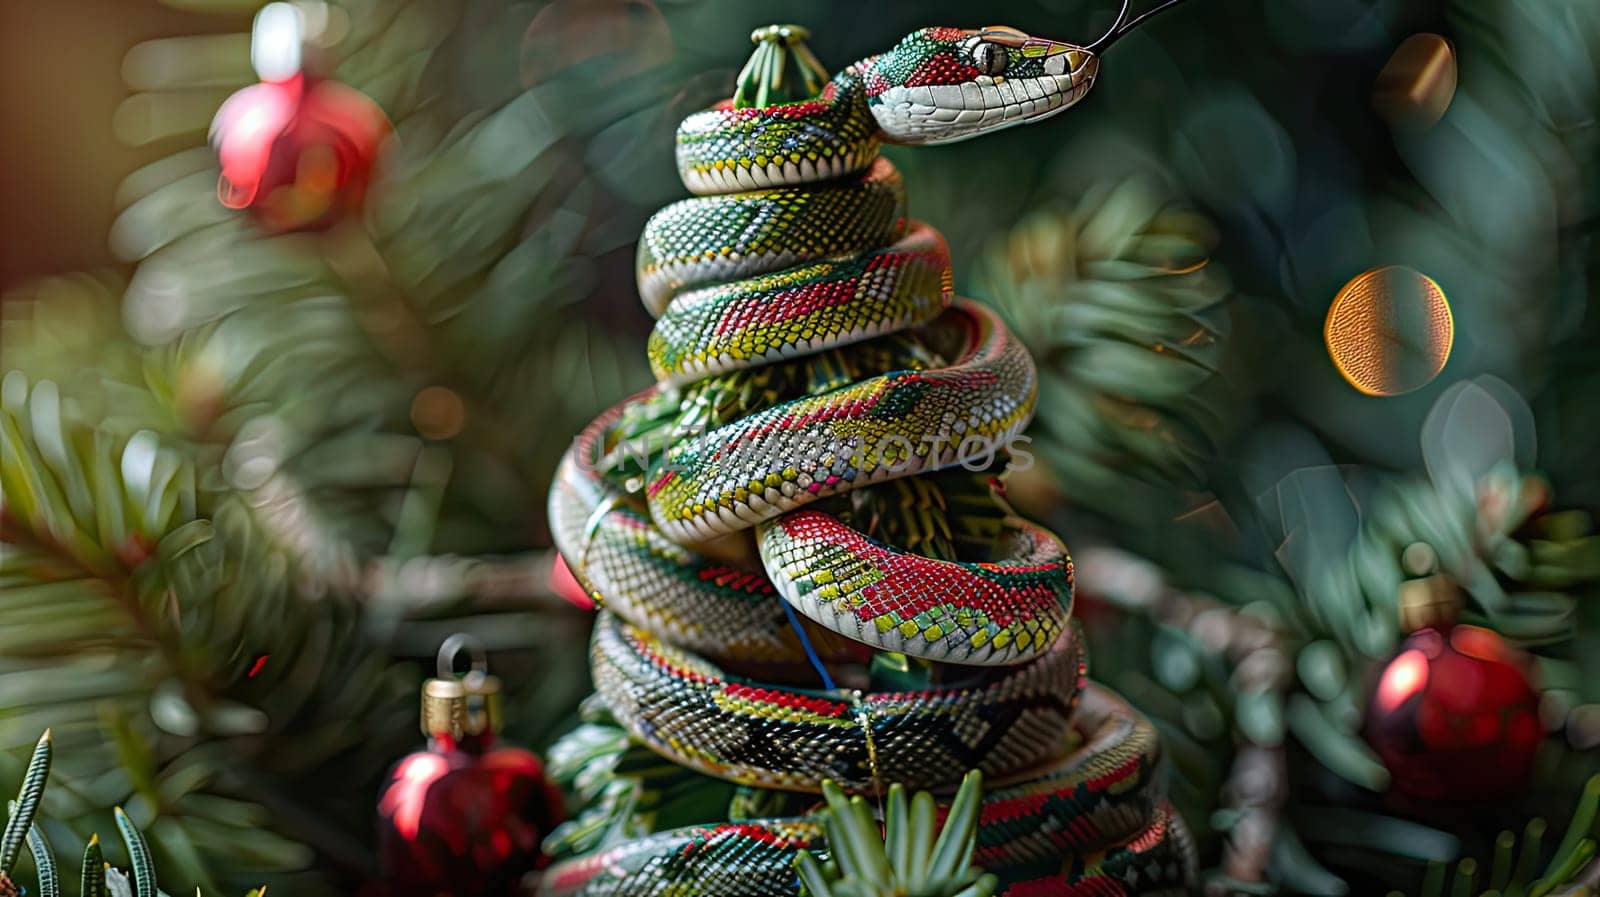 A snake coiled around the apex of a Christmas tree among the festive decorations.